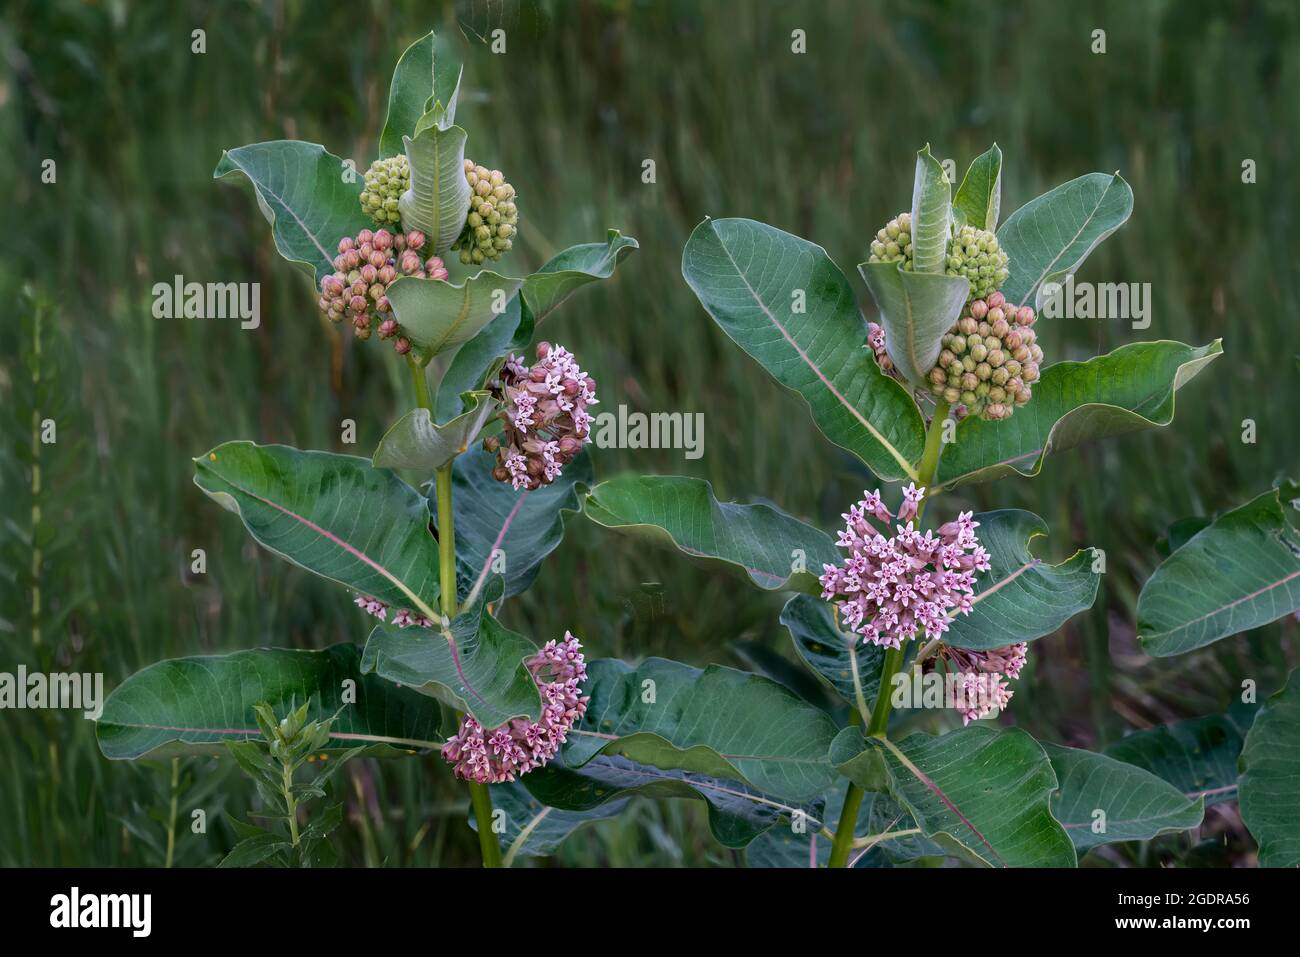 The Milkweed plant in bloom at the Discovery Nature Sanctuary, Winkler, Manitoba, Canada. Stock Photo